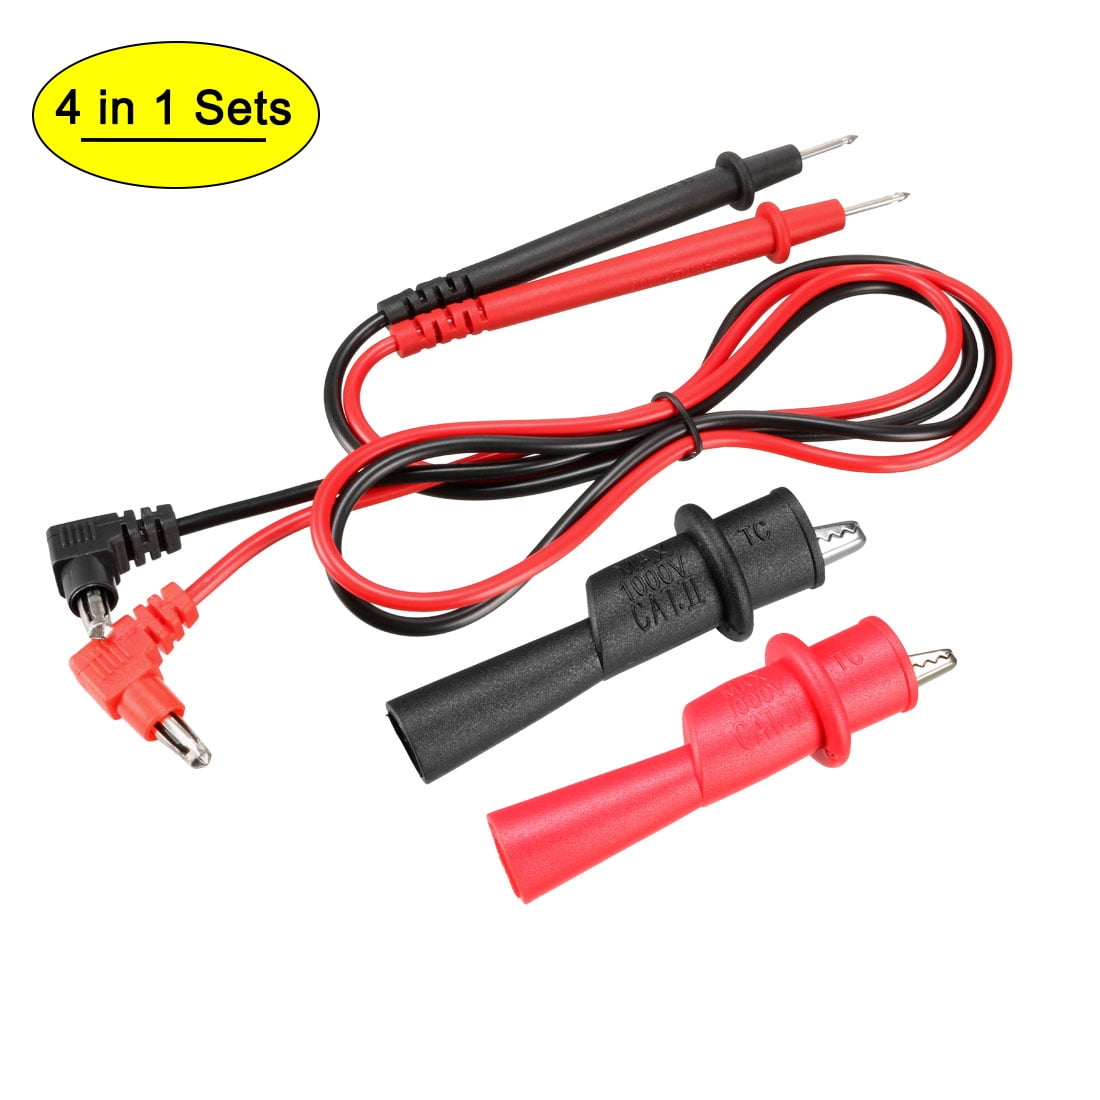 Pangding Banana Plug Electronic Multimeter Multi Meter Test Lead Probe Cable Set 4mm